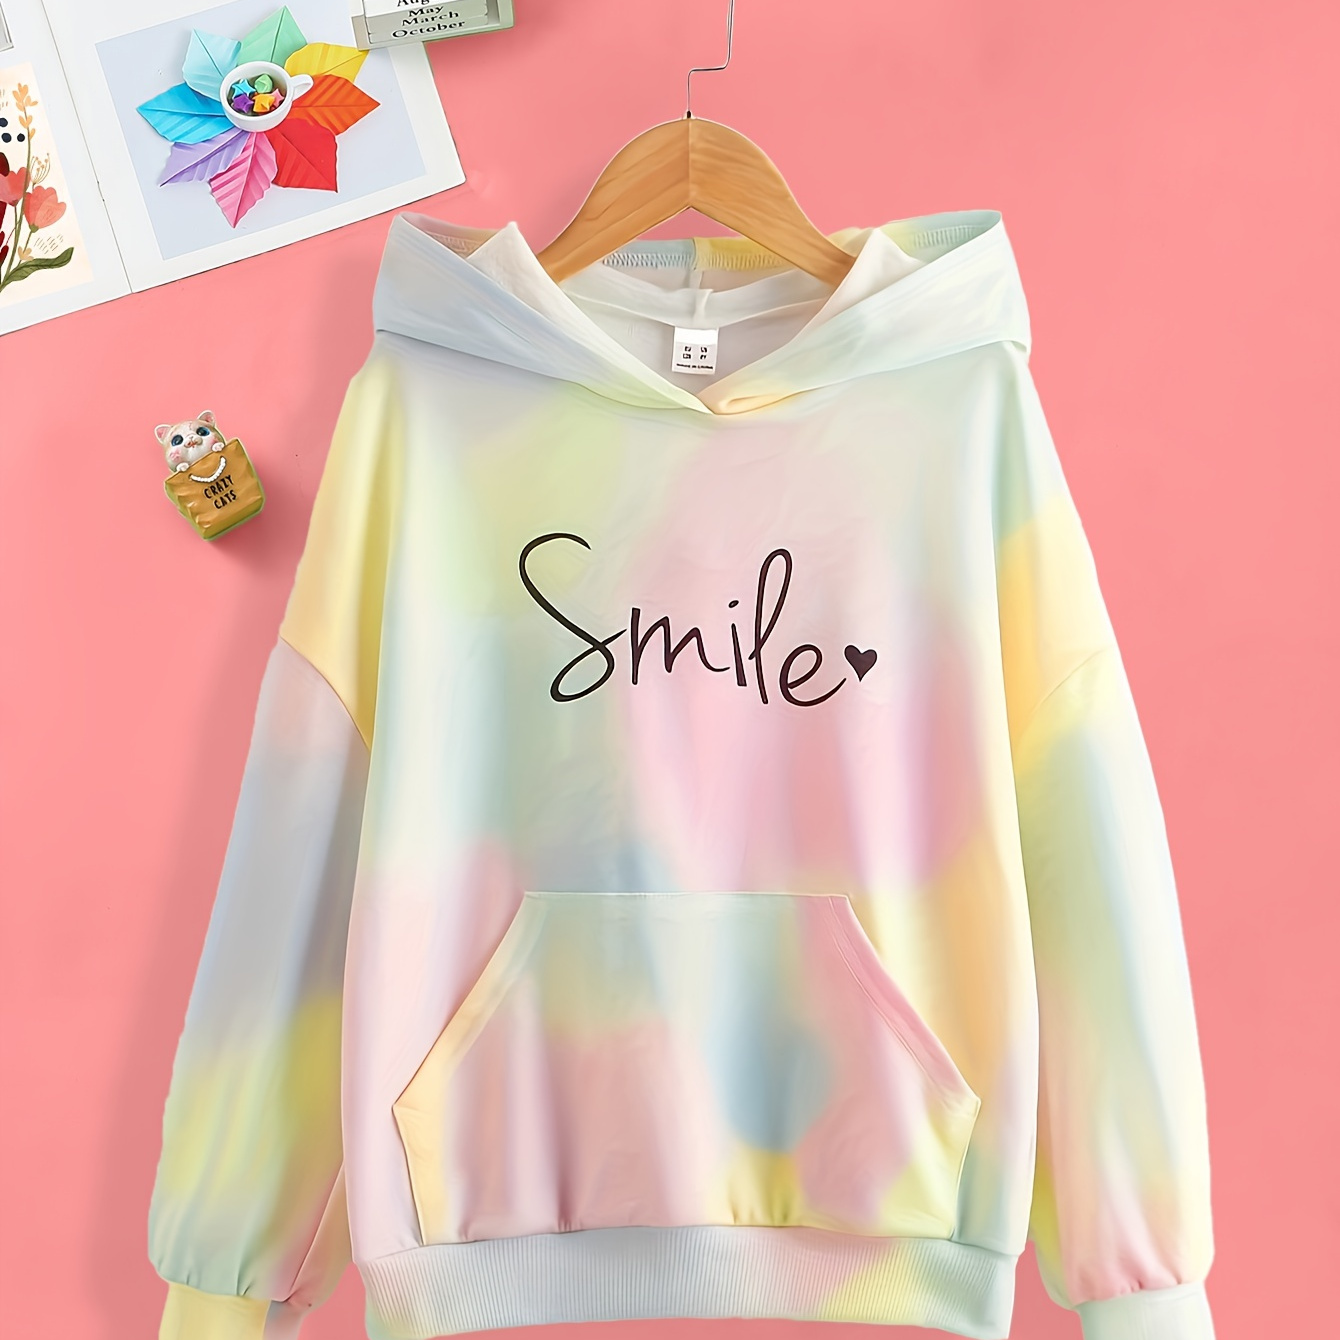 

Smile Gradient Print Girls Hoodie Sweatshirt, Casual Pocket Front Long Sleeve Tops For Kids Daily, Holiday Gift